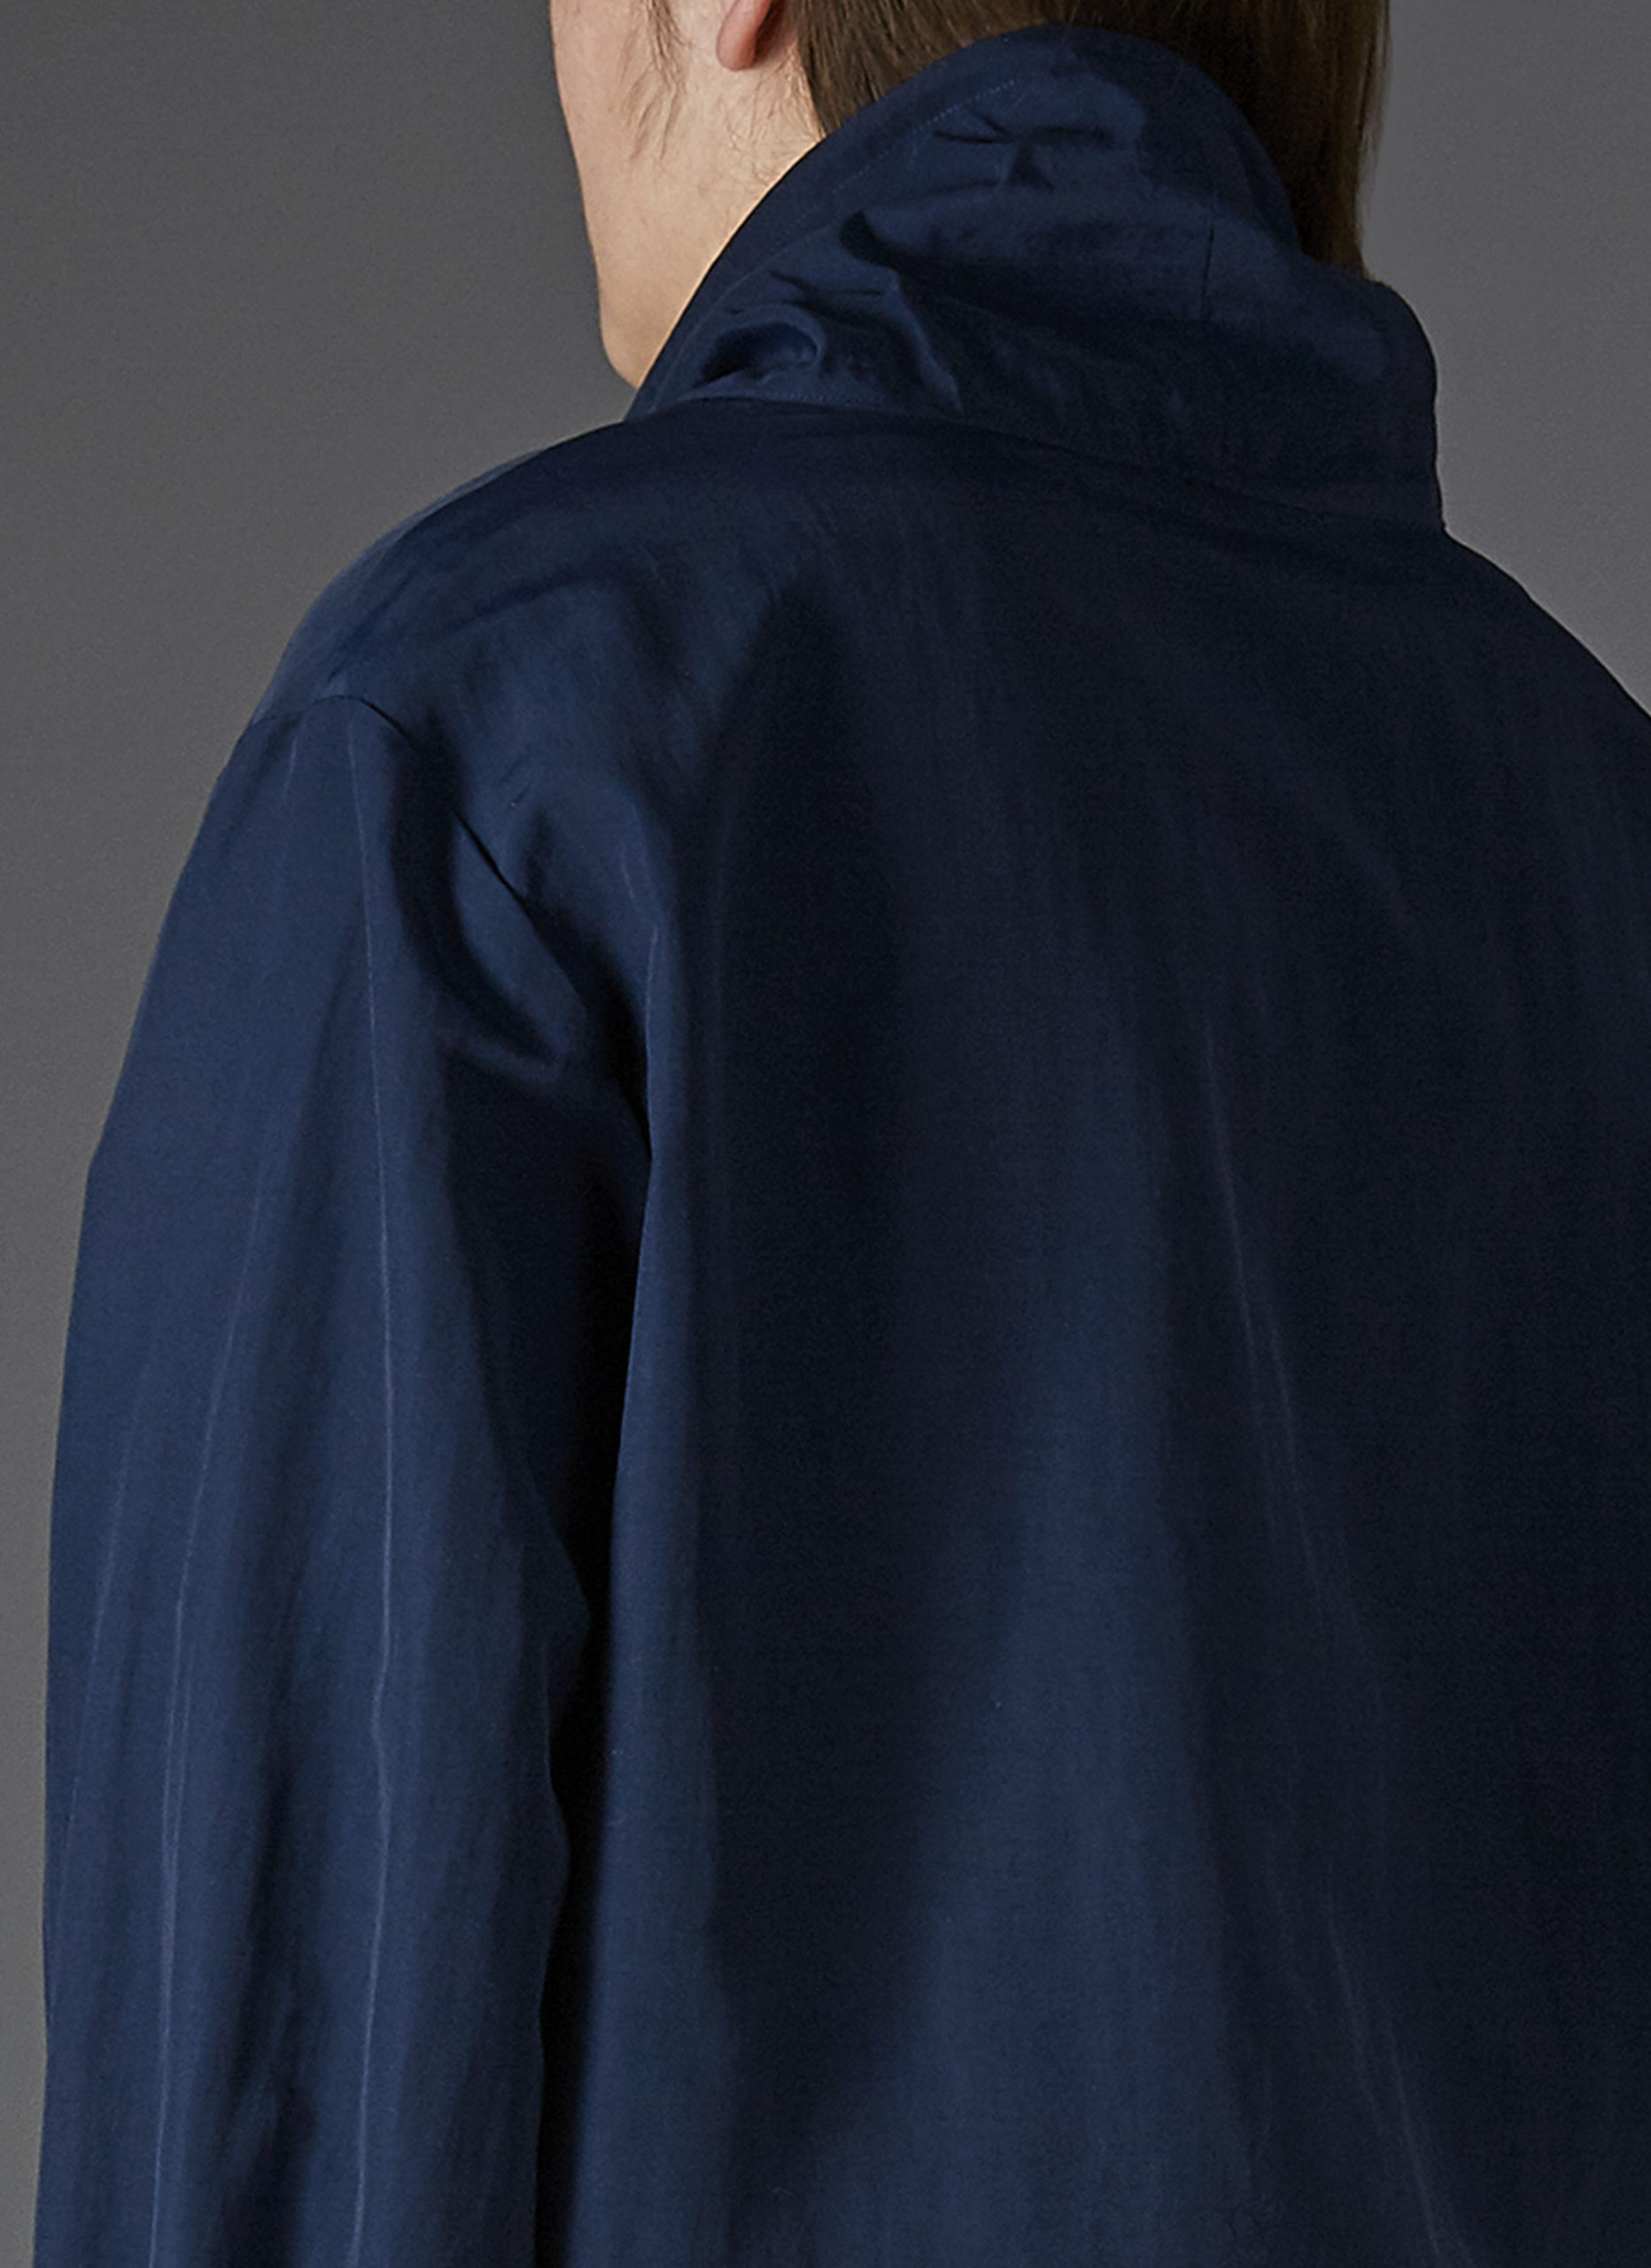 COWL NECK TRACK JACKET IN MIDNIGHT BLUE - GREI New York